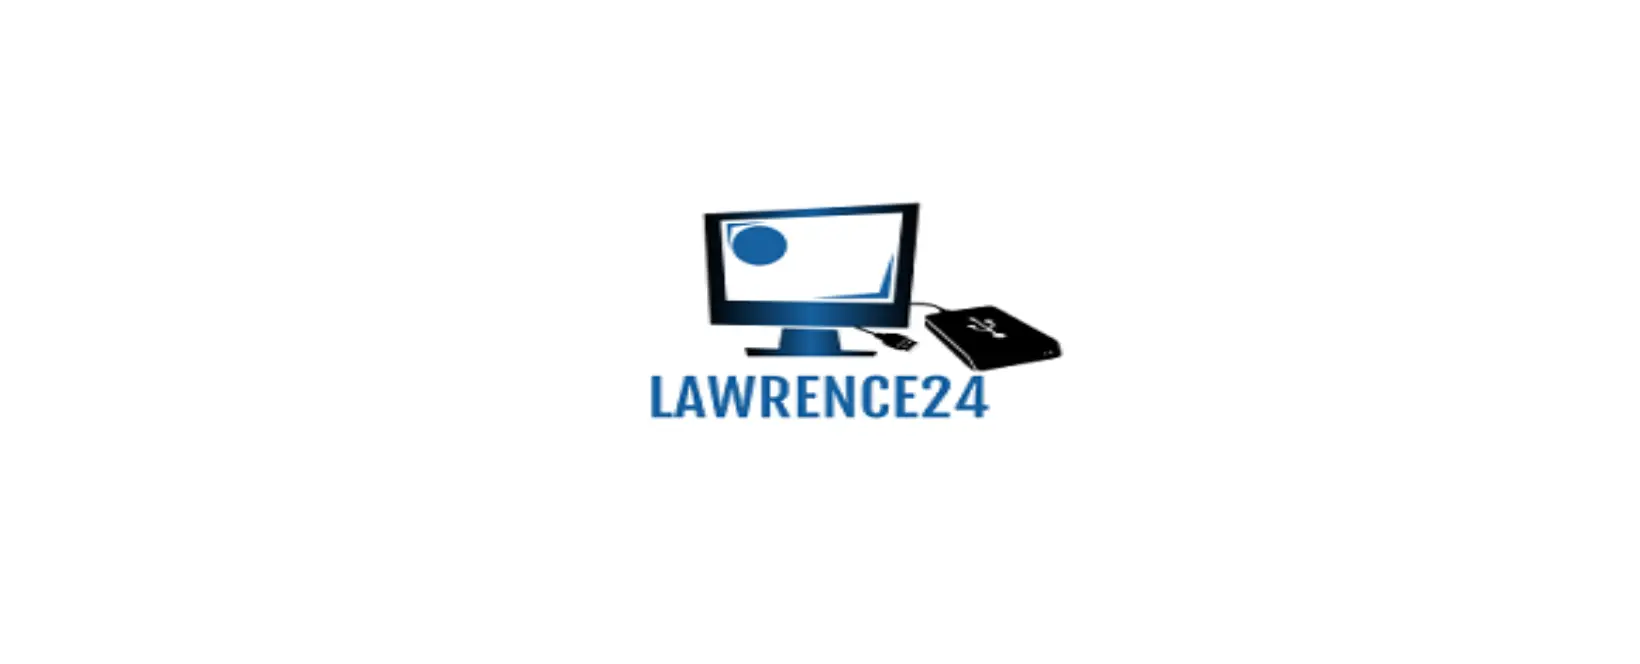 Lawrence24 UK Discount Code 2022